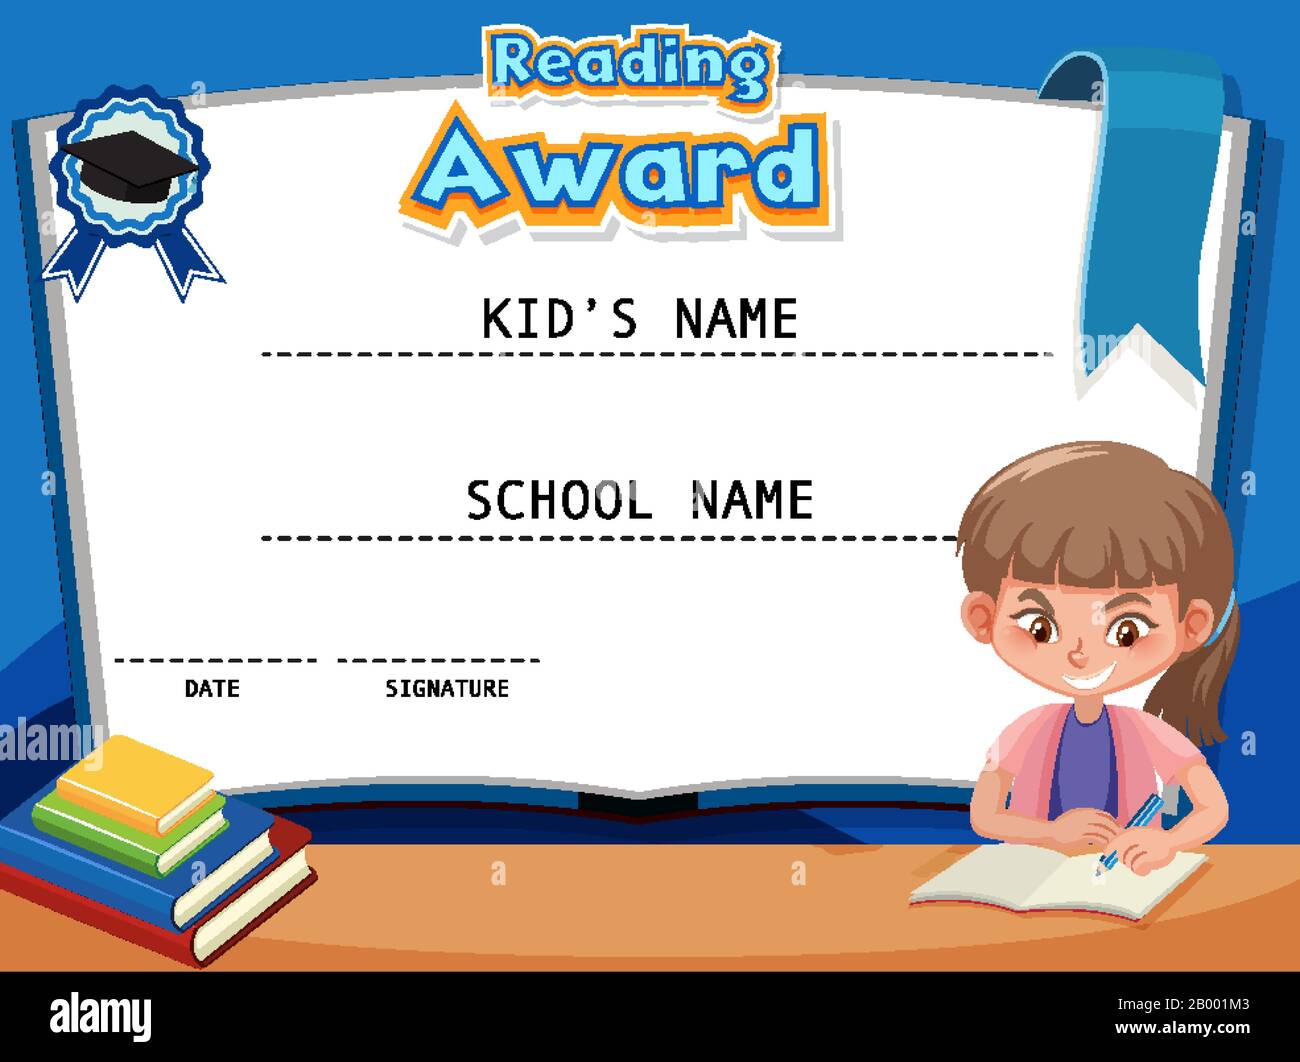 Certificate template for reading award with girl reading book in background illustration Stock Vector